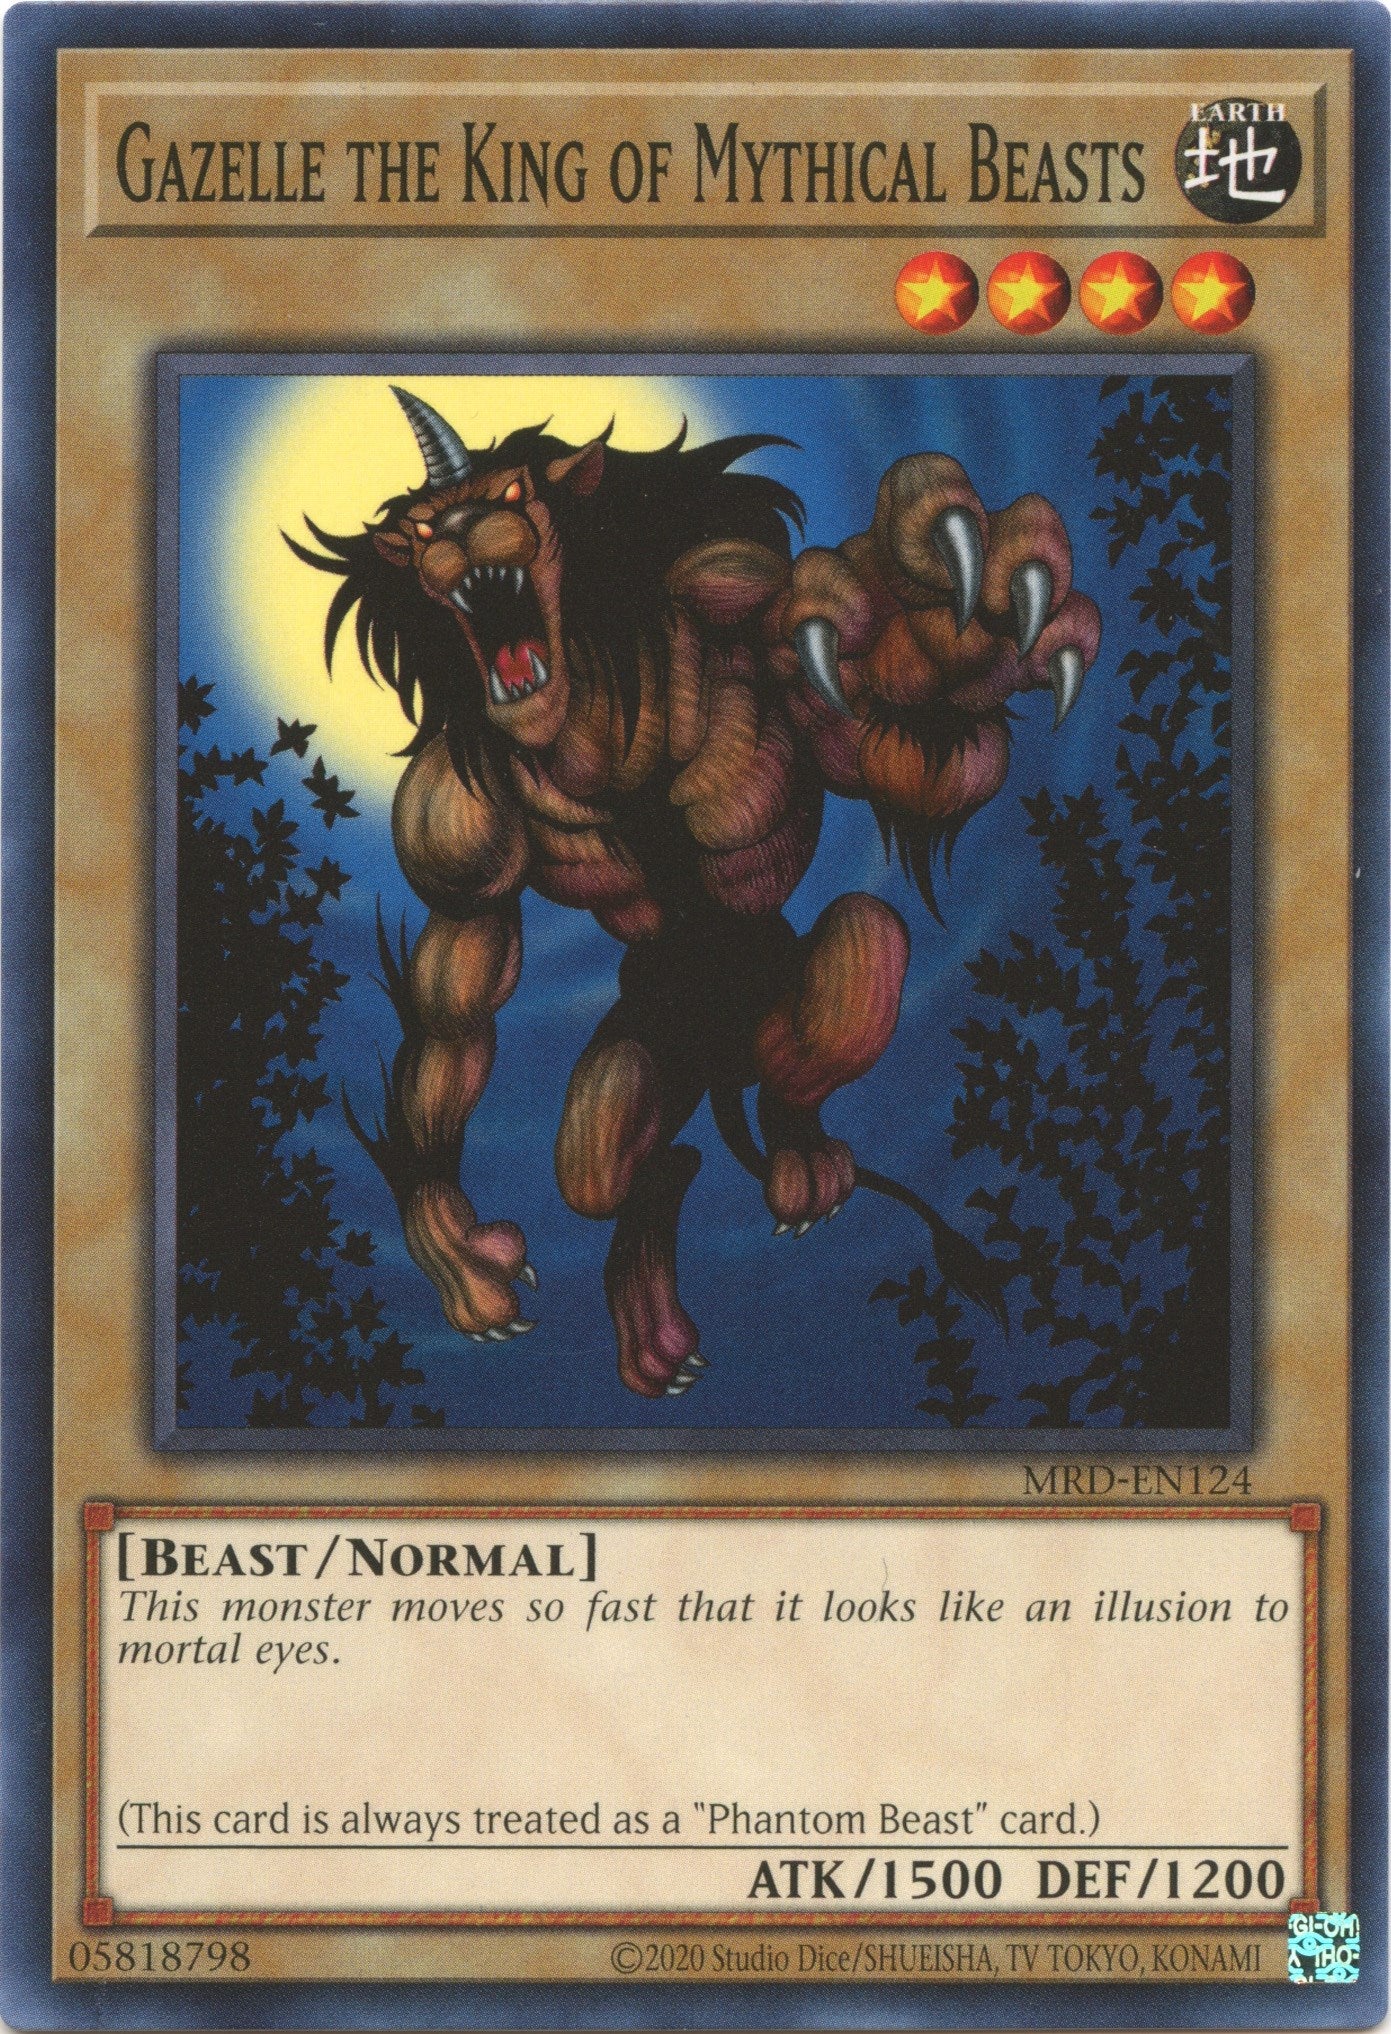 Gazelle the King of Mythical Beasts (25th Anniversary) [MRD-EN124] Common | Amazing Games TCG